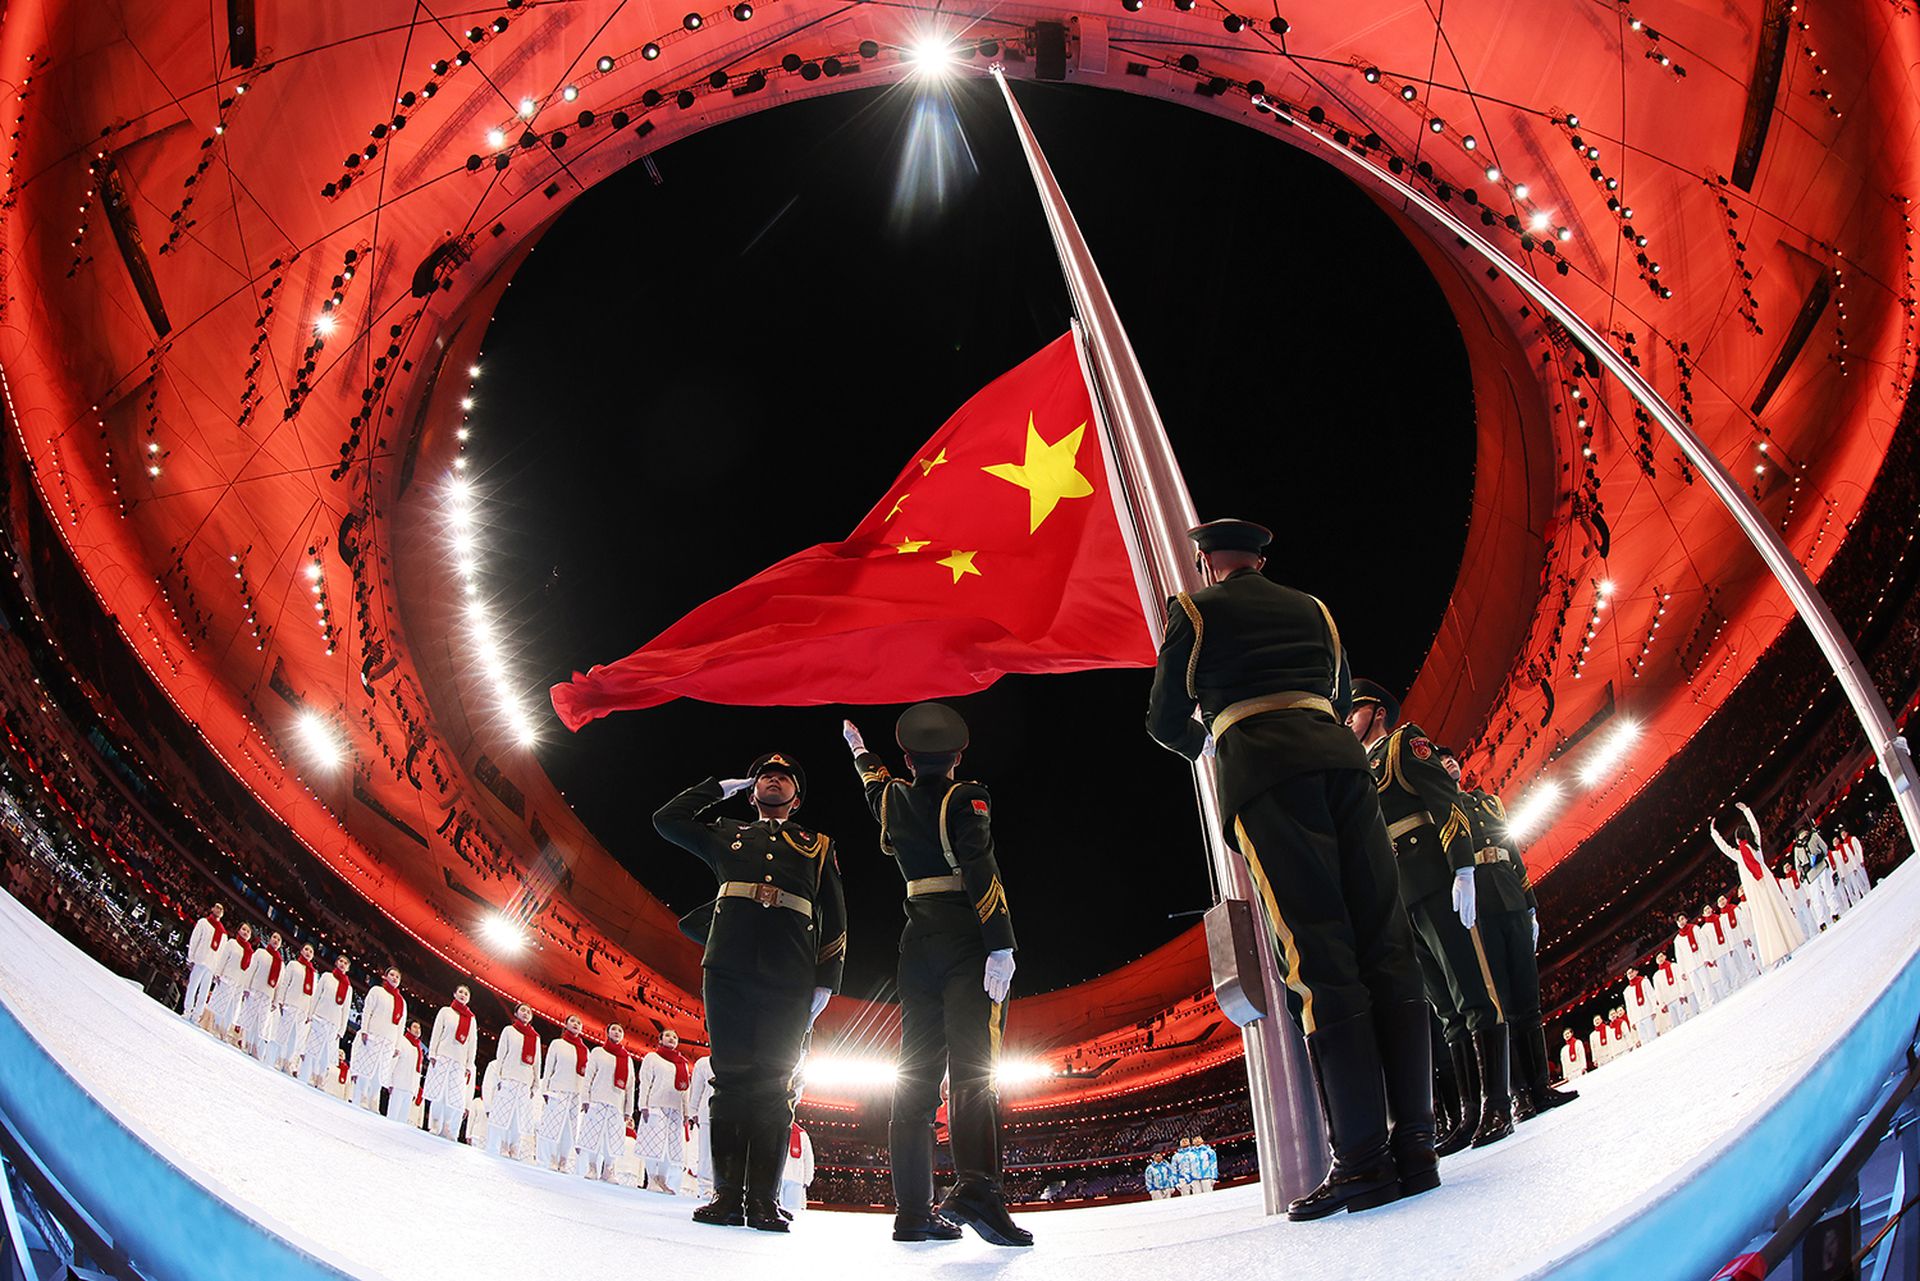 Symantec reported observing a Chinese state-backed APT group attacking governments and NGOs. Pictured: The Chinese flag is raised inside a stadium during the opening ceremony of the Beijing 2022 Winter Paralympics at the Beijing National Stadium on March 4, 2022, in Beijing. (Photo by Lintao Zhang/Getty Images)